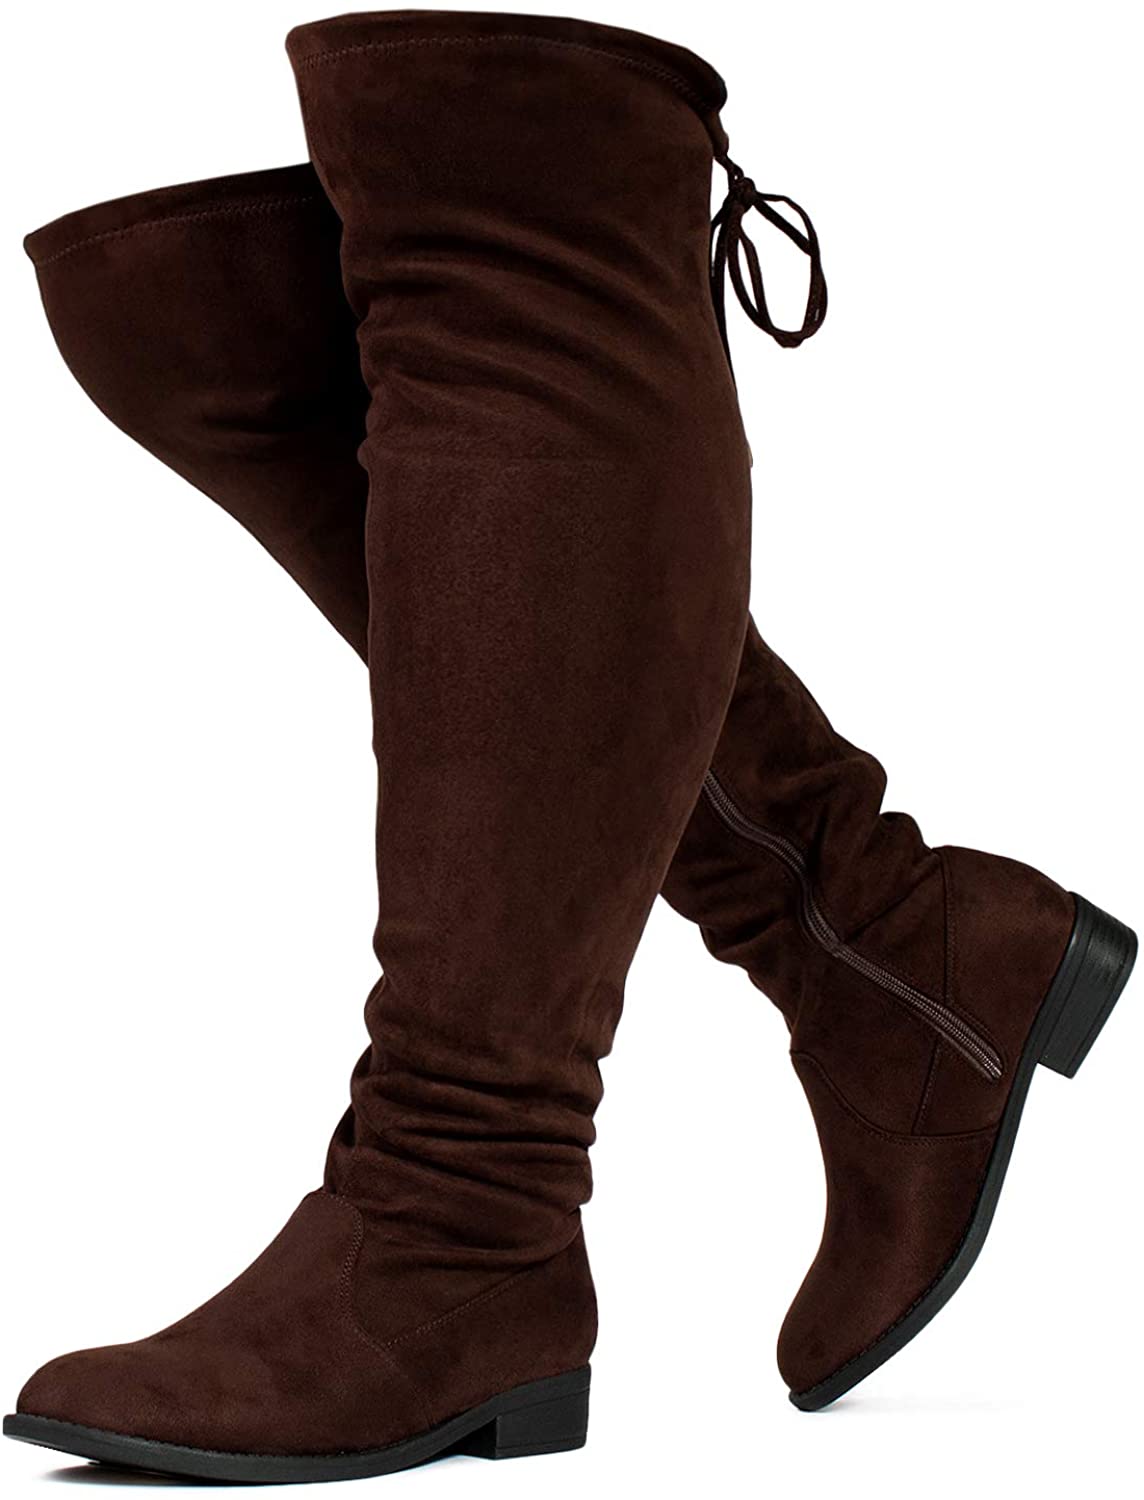 Women's Tokyo Stretchy Over The Knee Boots Wide Calf 